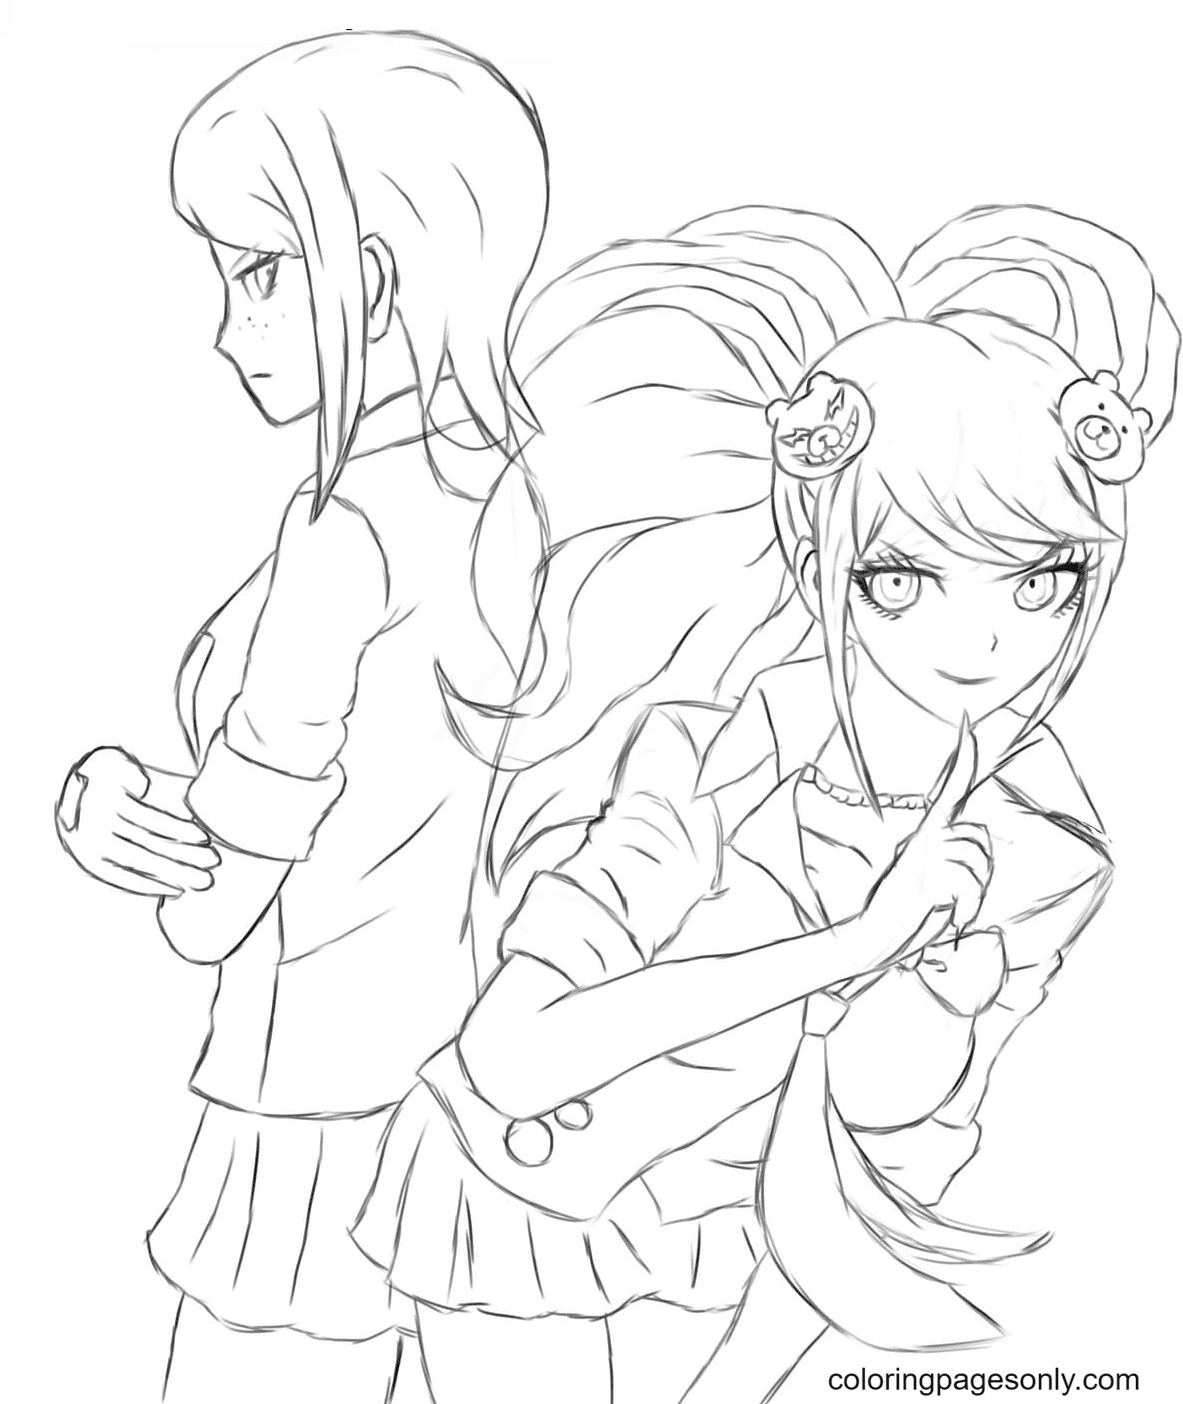 Two characters from Danganronpa Coloring Pages